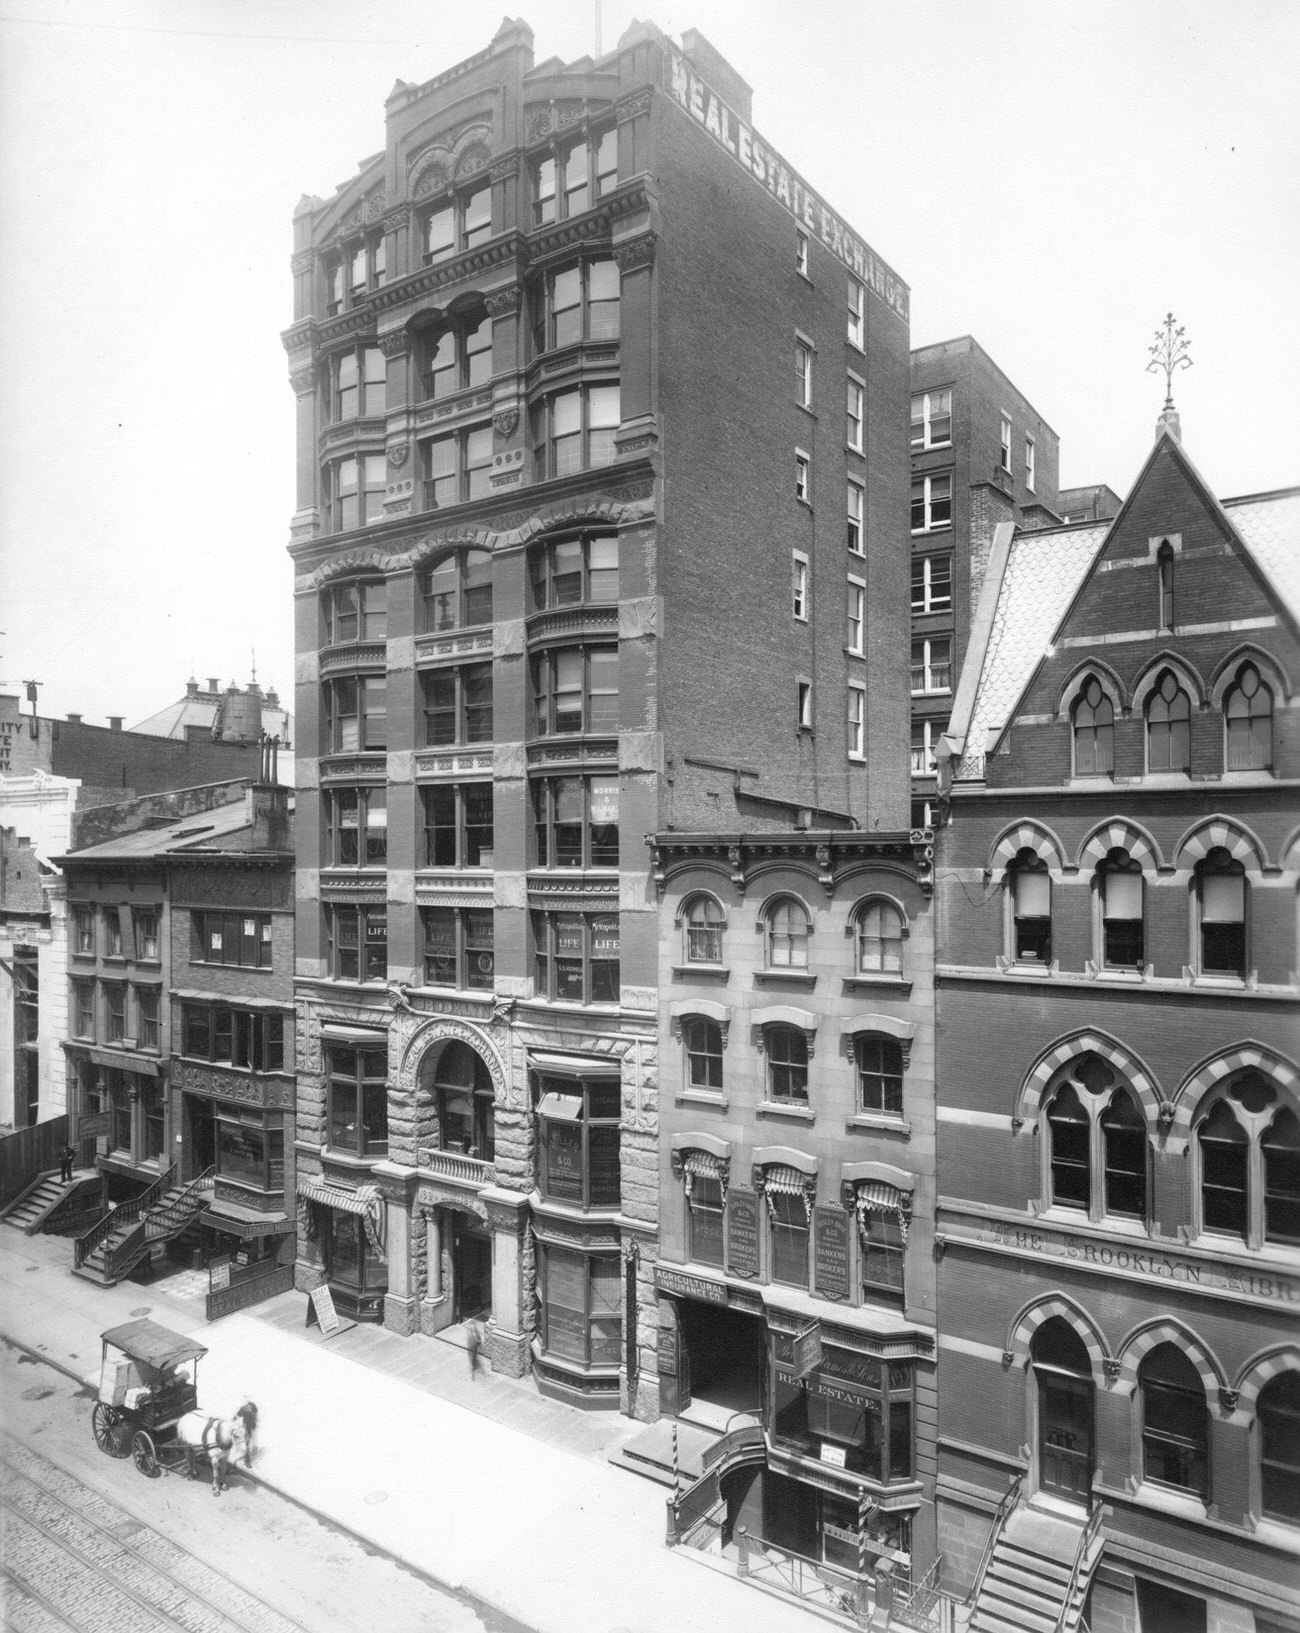 Real Estate Exchange Building And Brooklyn Public Library On Montague Street, Brooklyn Heights, Brooklyn, 1895